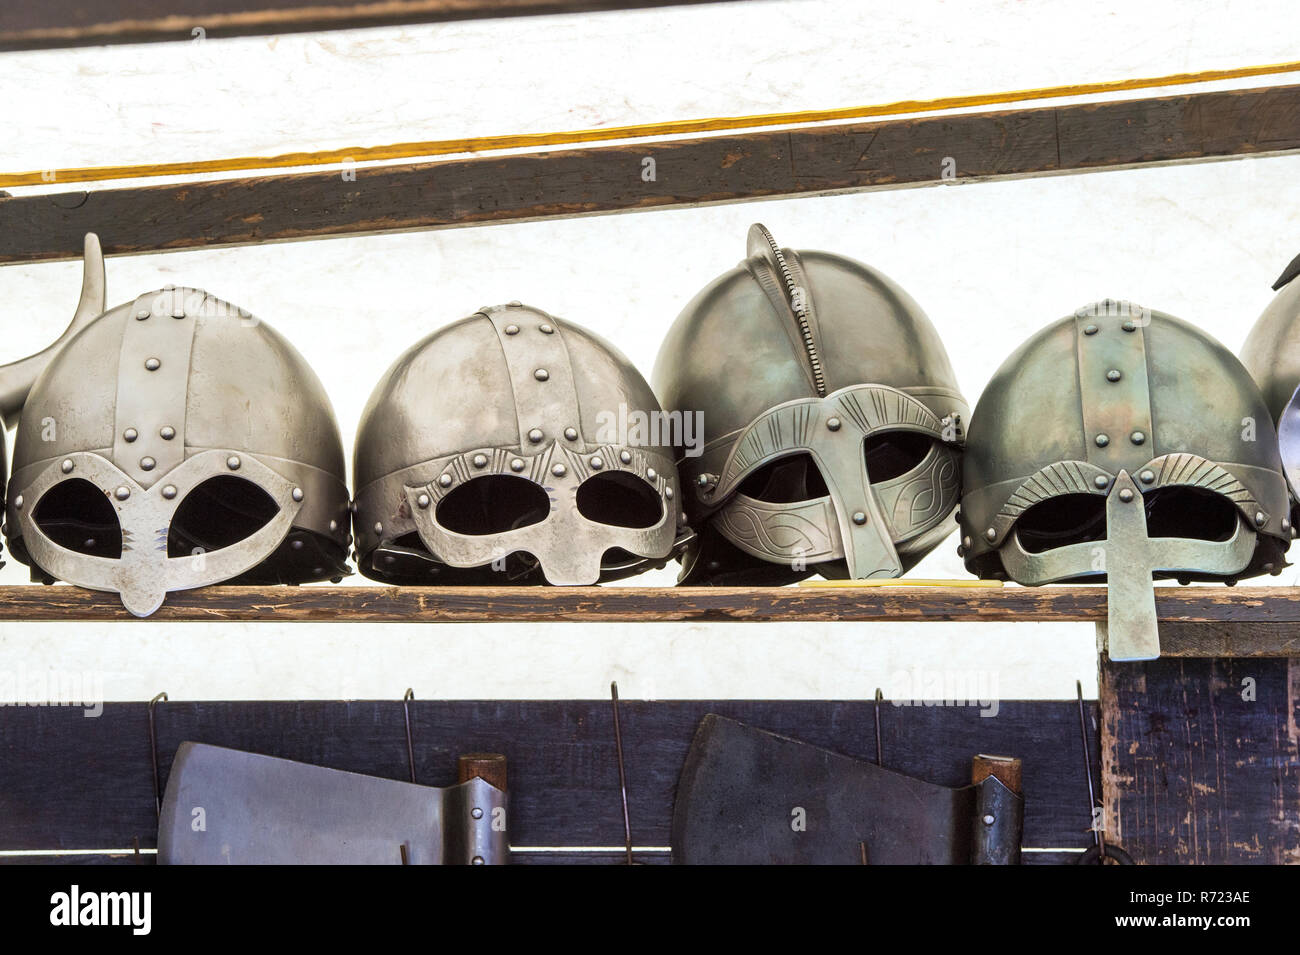 Medieval knights helmets in a tent at Tewkesbury medieval festival 2016, England Stock Photo